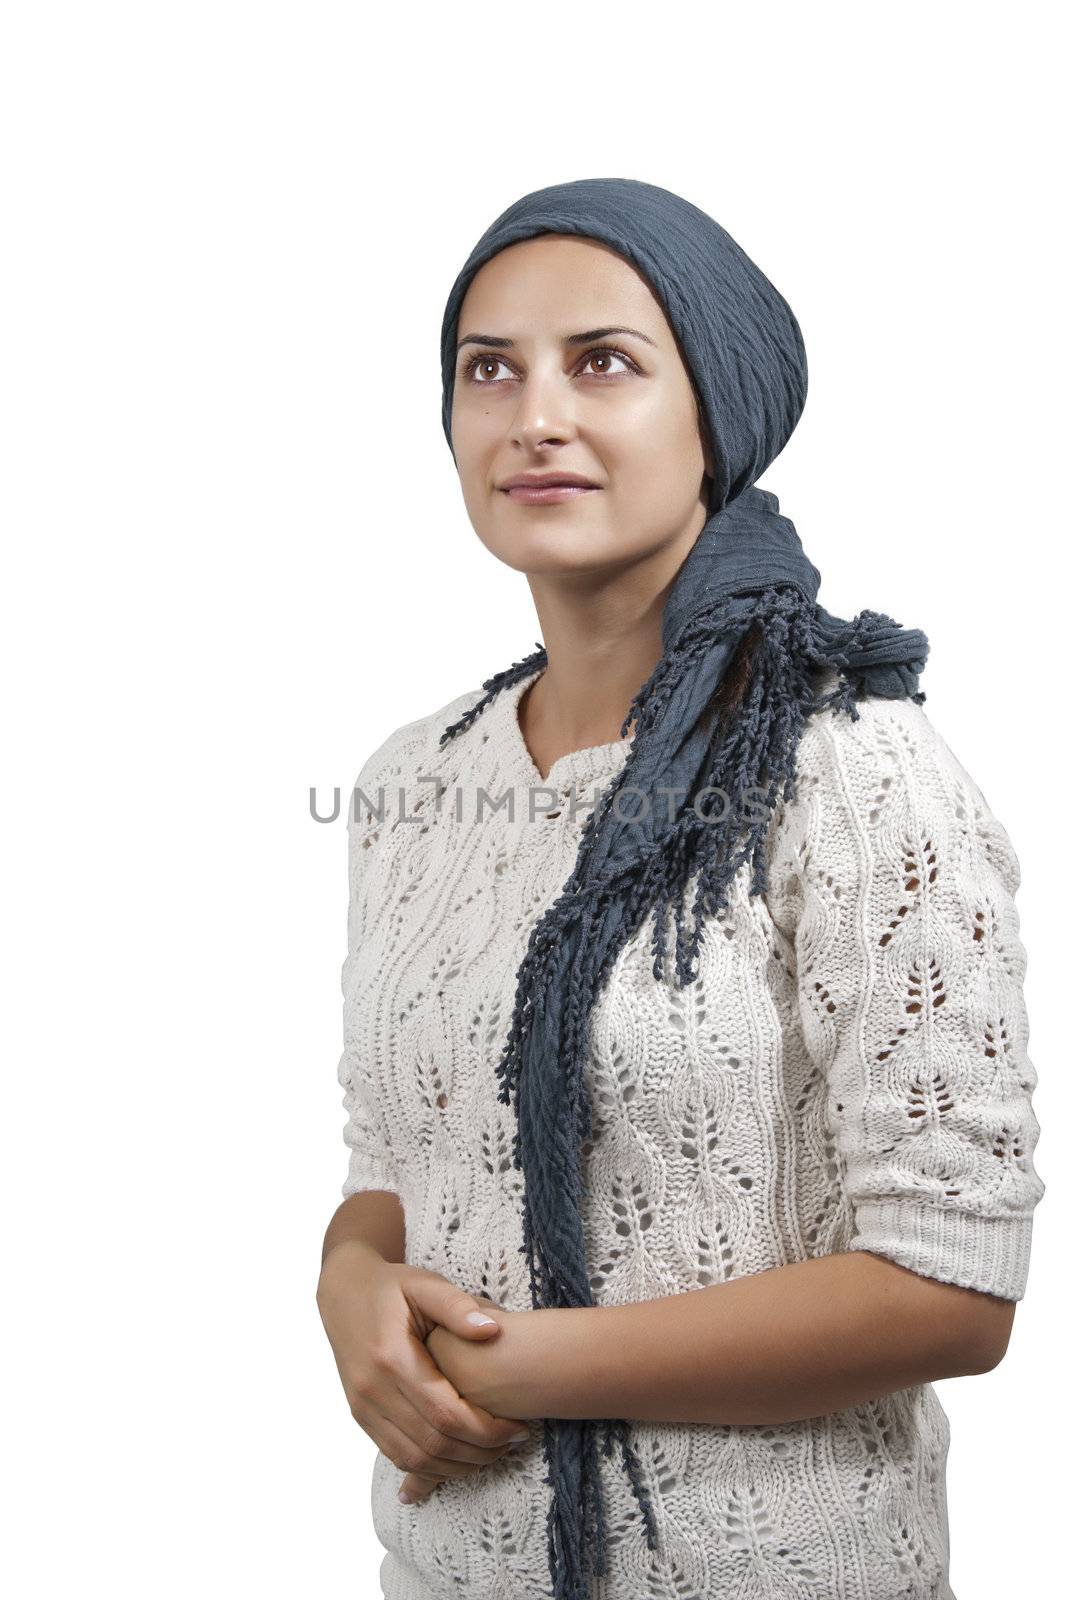 Female with Blue Veil Smile